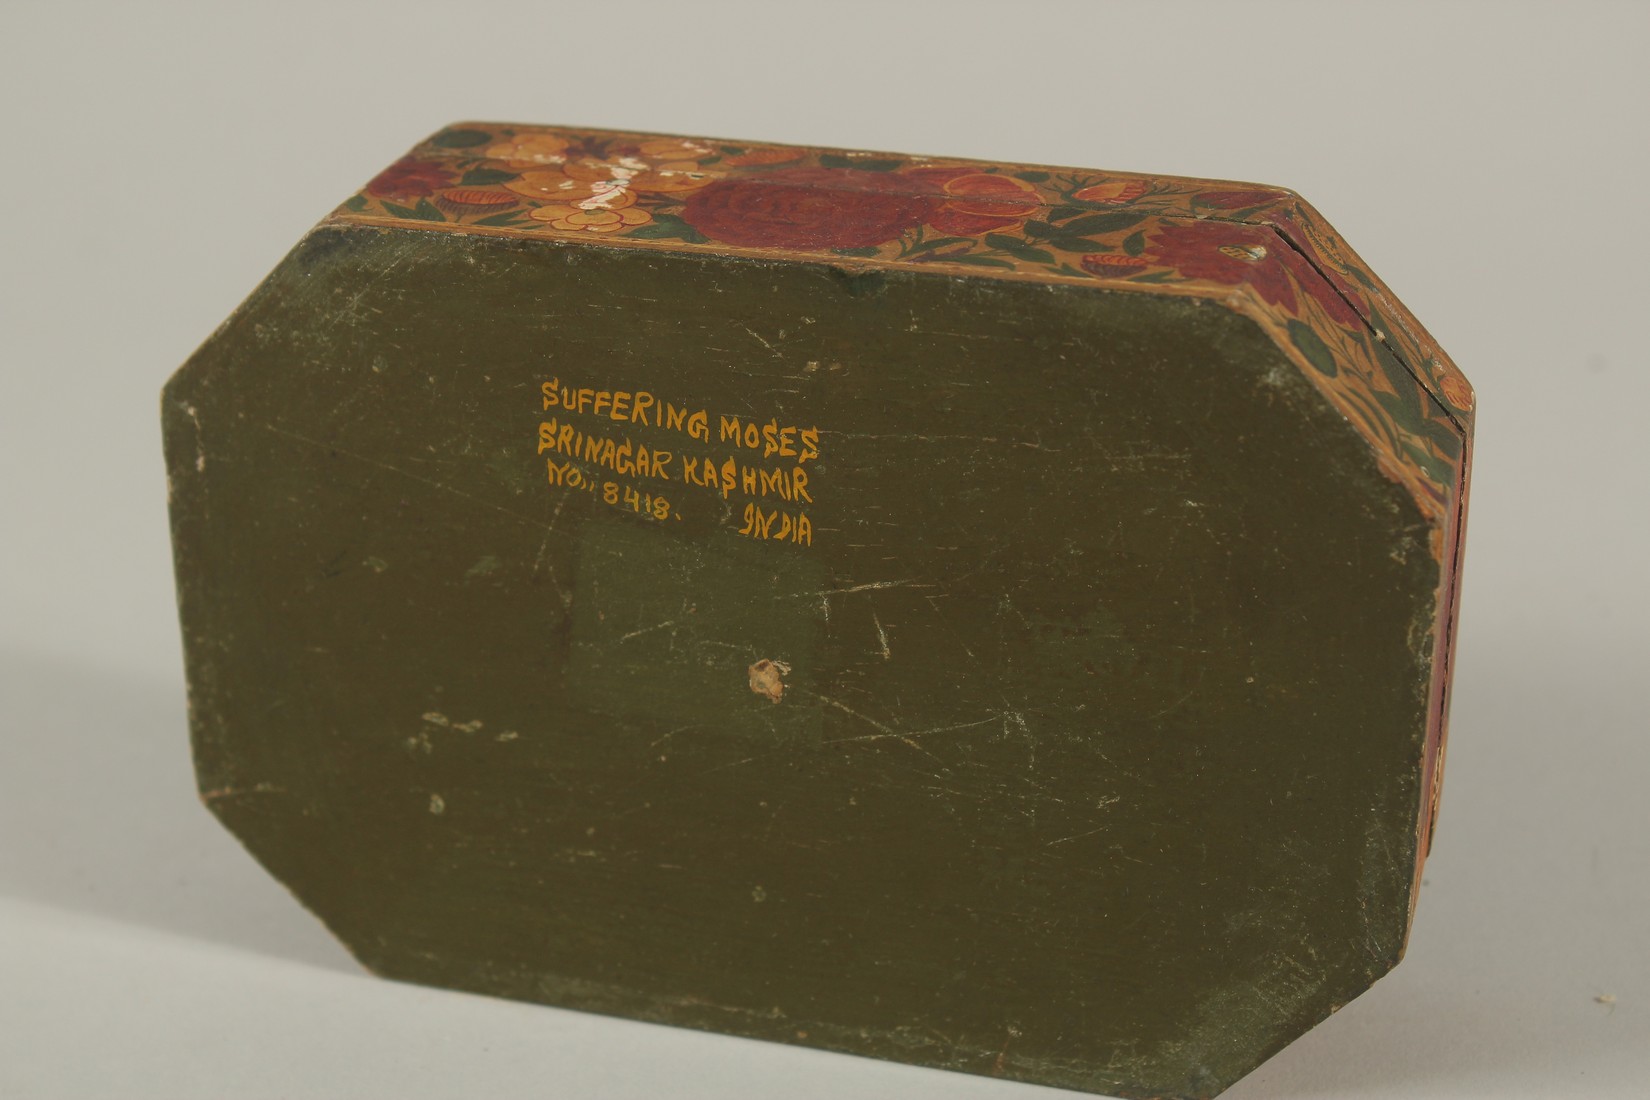 A 19TH CENTURY INDIAN KASHMIRI GILDED AND LACQUERED PAPIER MACHE BOX, SIGNED BY SUFFERING MOSES, - Image 4 of 4